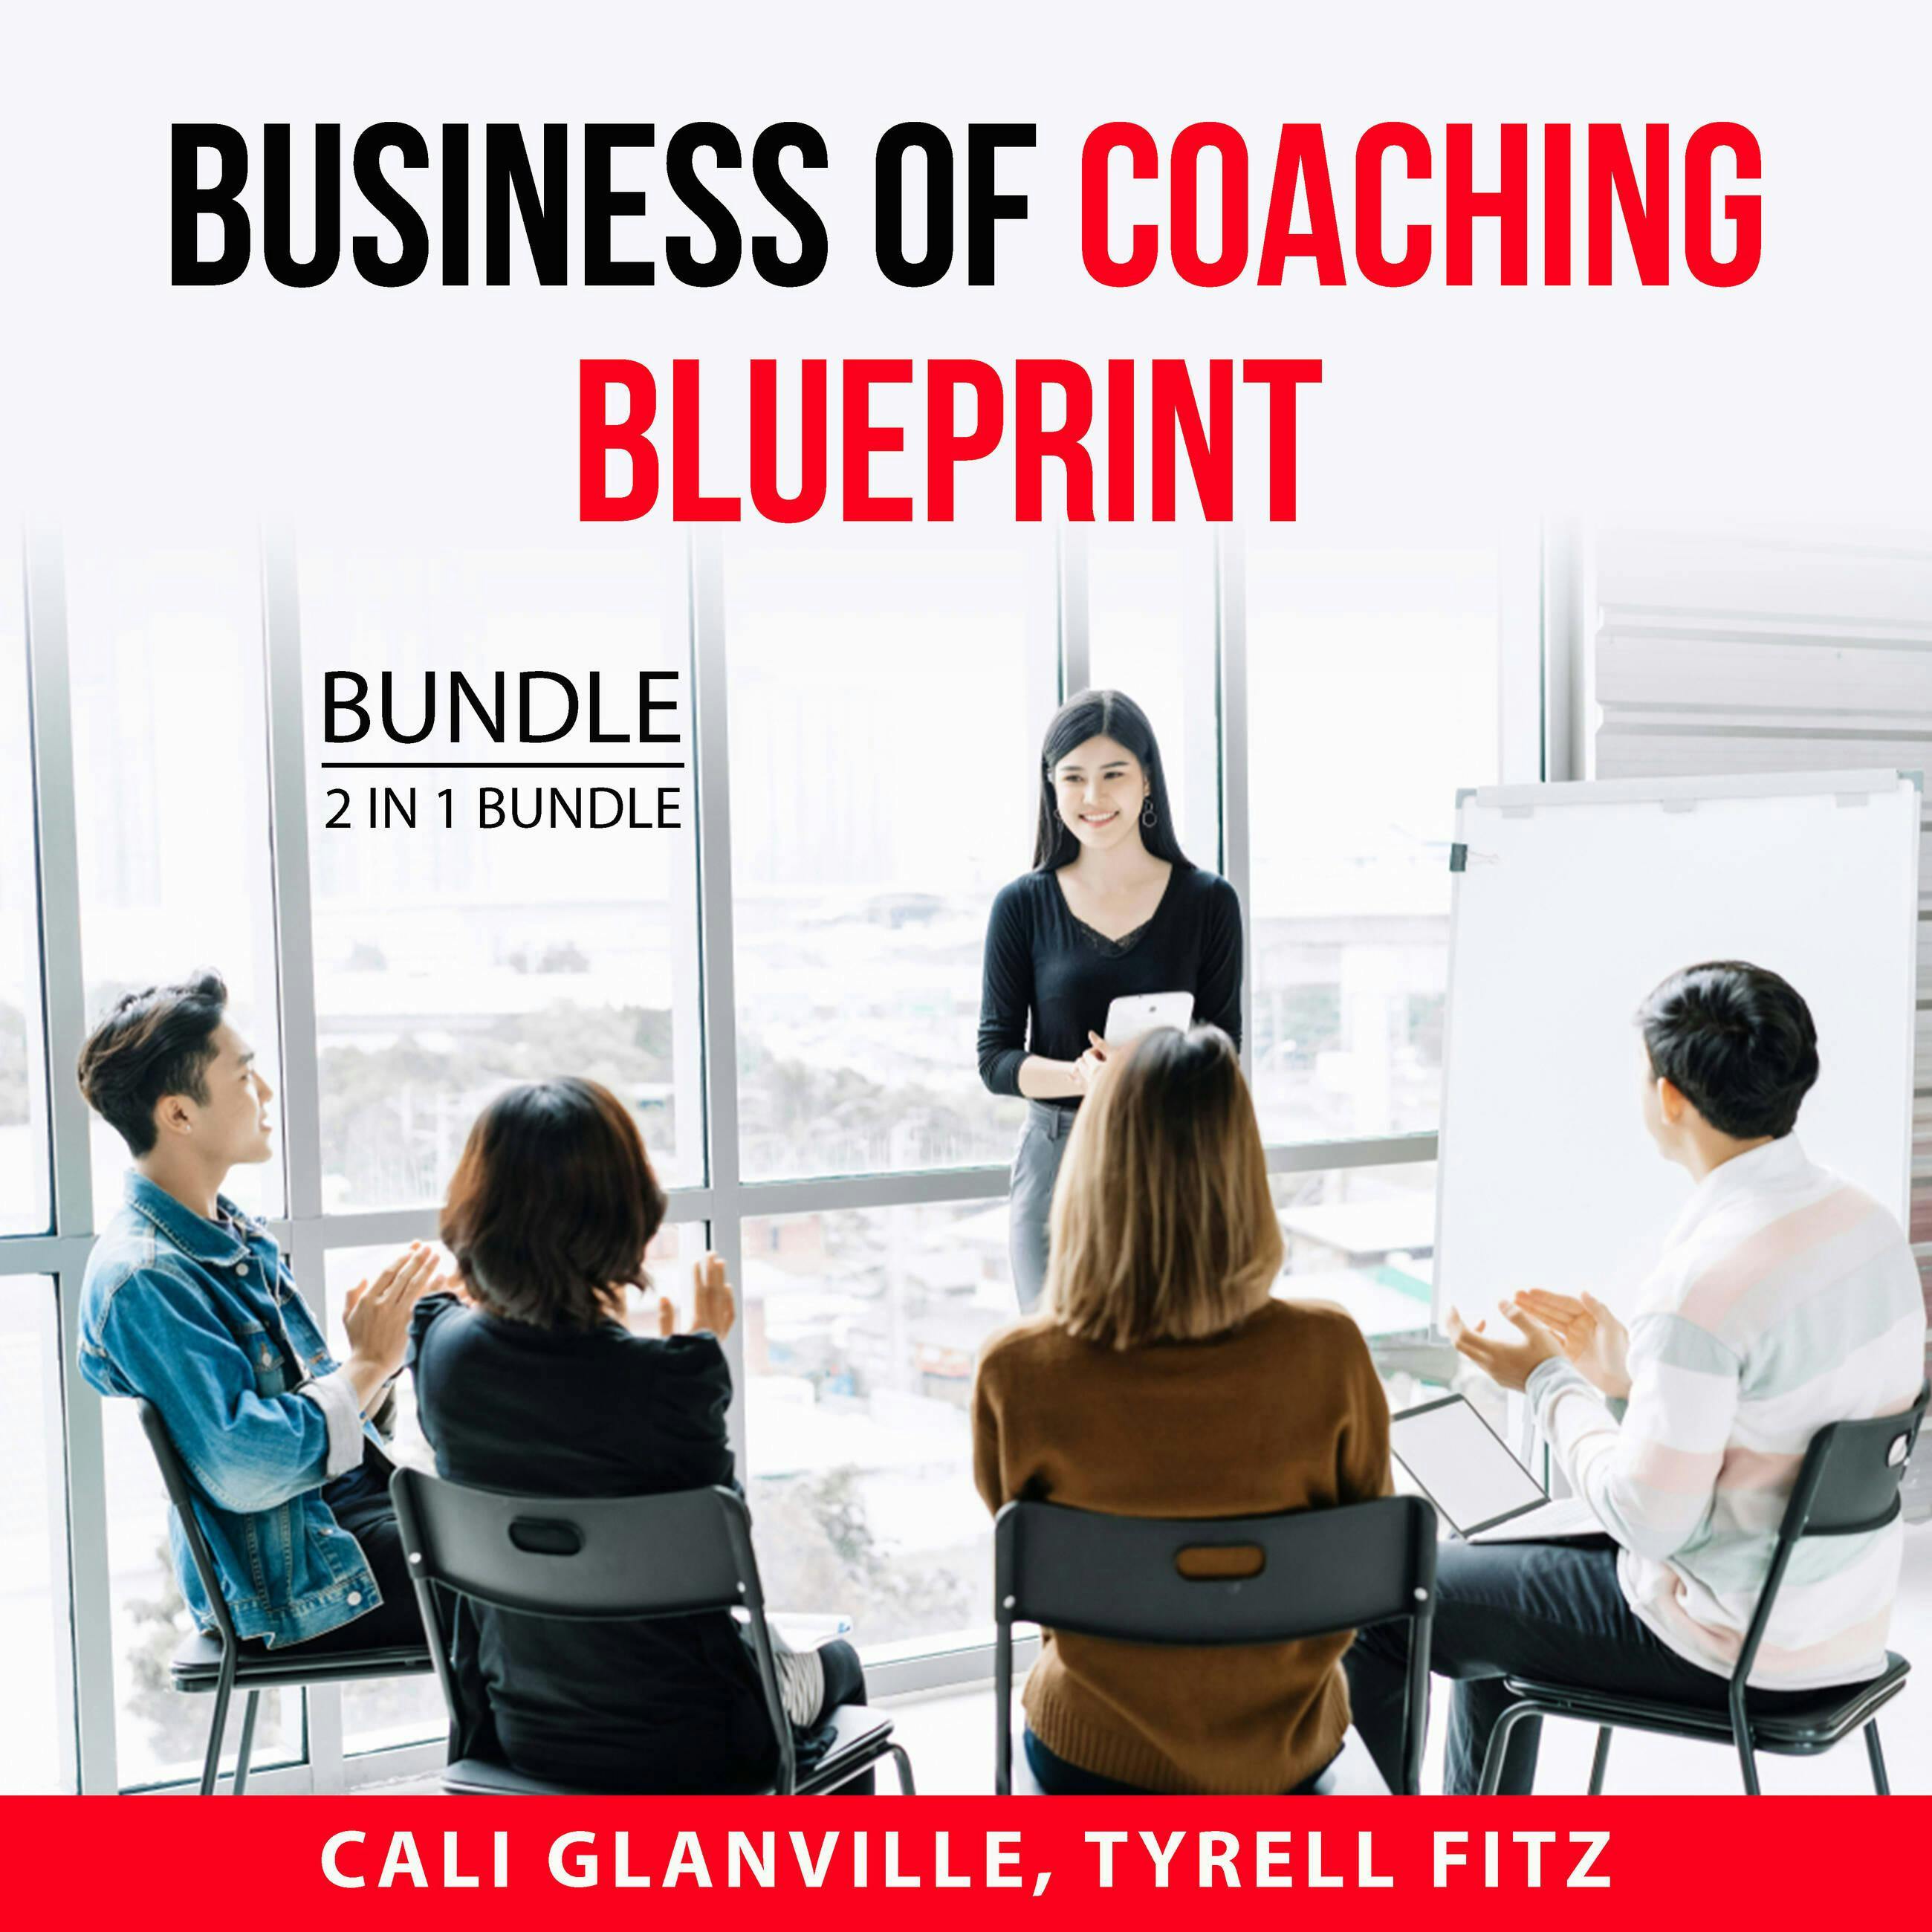 Business of Coaching Blueprint Bundle, 2 in 1 Bundle: Coaching Business Bible and Coaching Business Principles - undefined